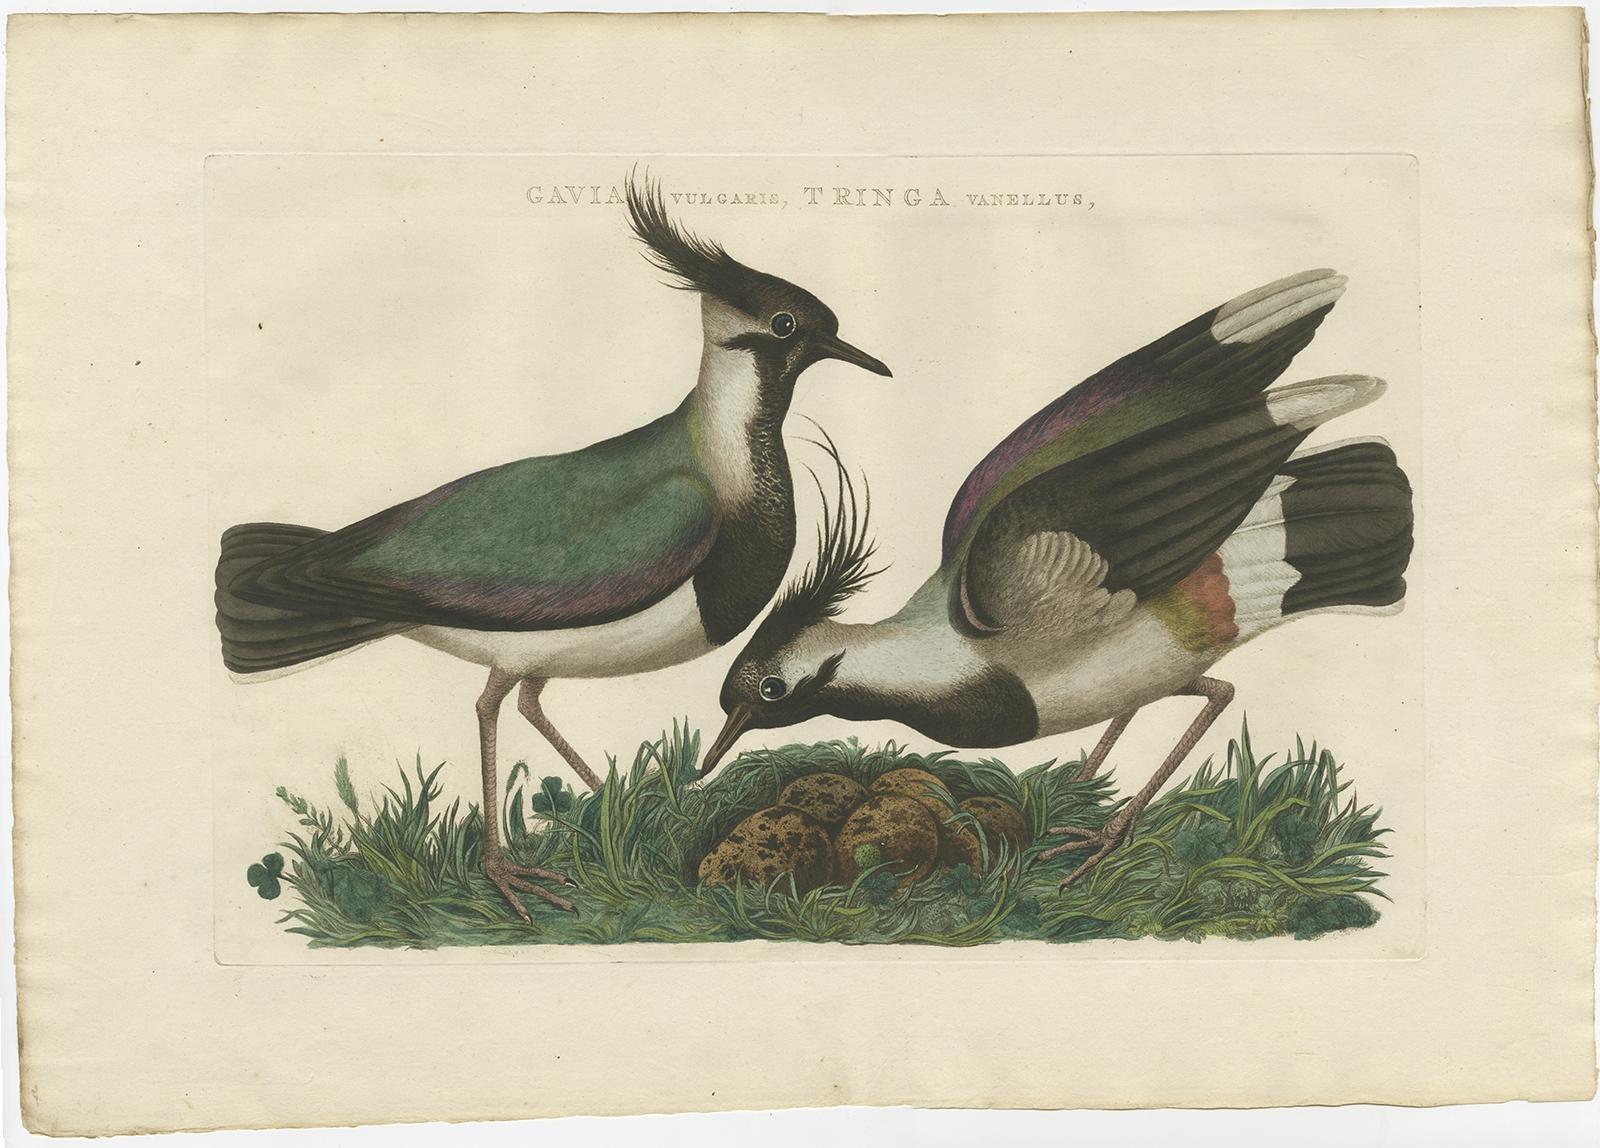 Antique bird print titled 'Gavia vulgaris, Tringa vanellus'. 

The northern lapwing (Vanellus vanellus), also known as the peewit or pewit, tuit or tew-it, green plover, or (in Britain and Ireland) just lapwing, is a bird in the lapwing family. It